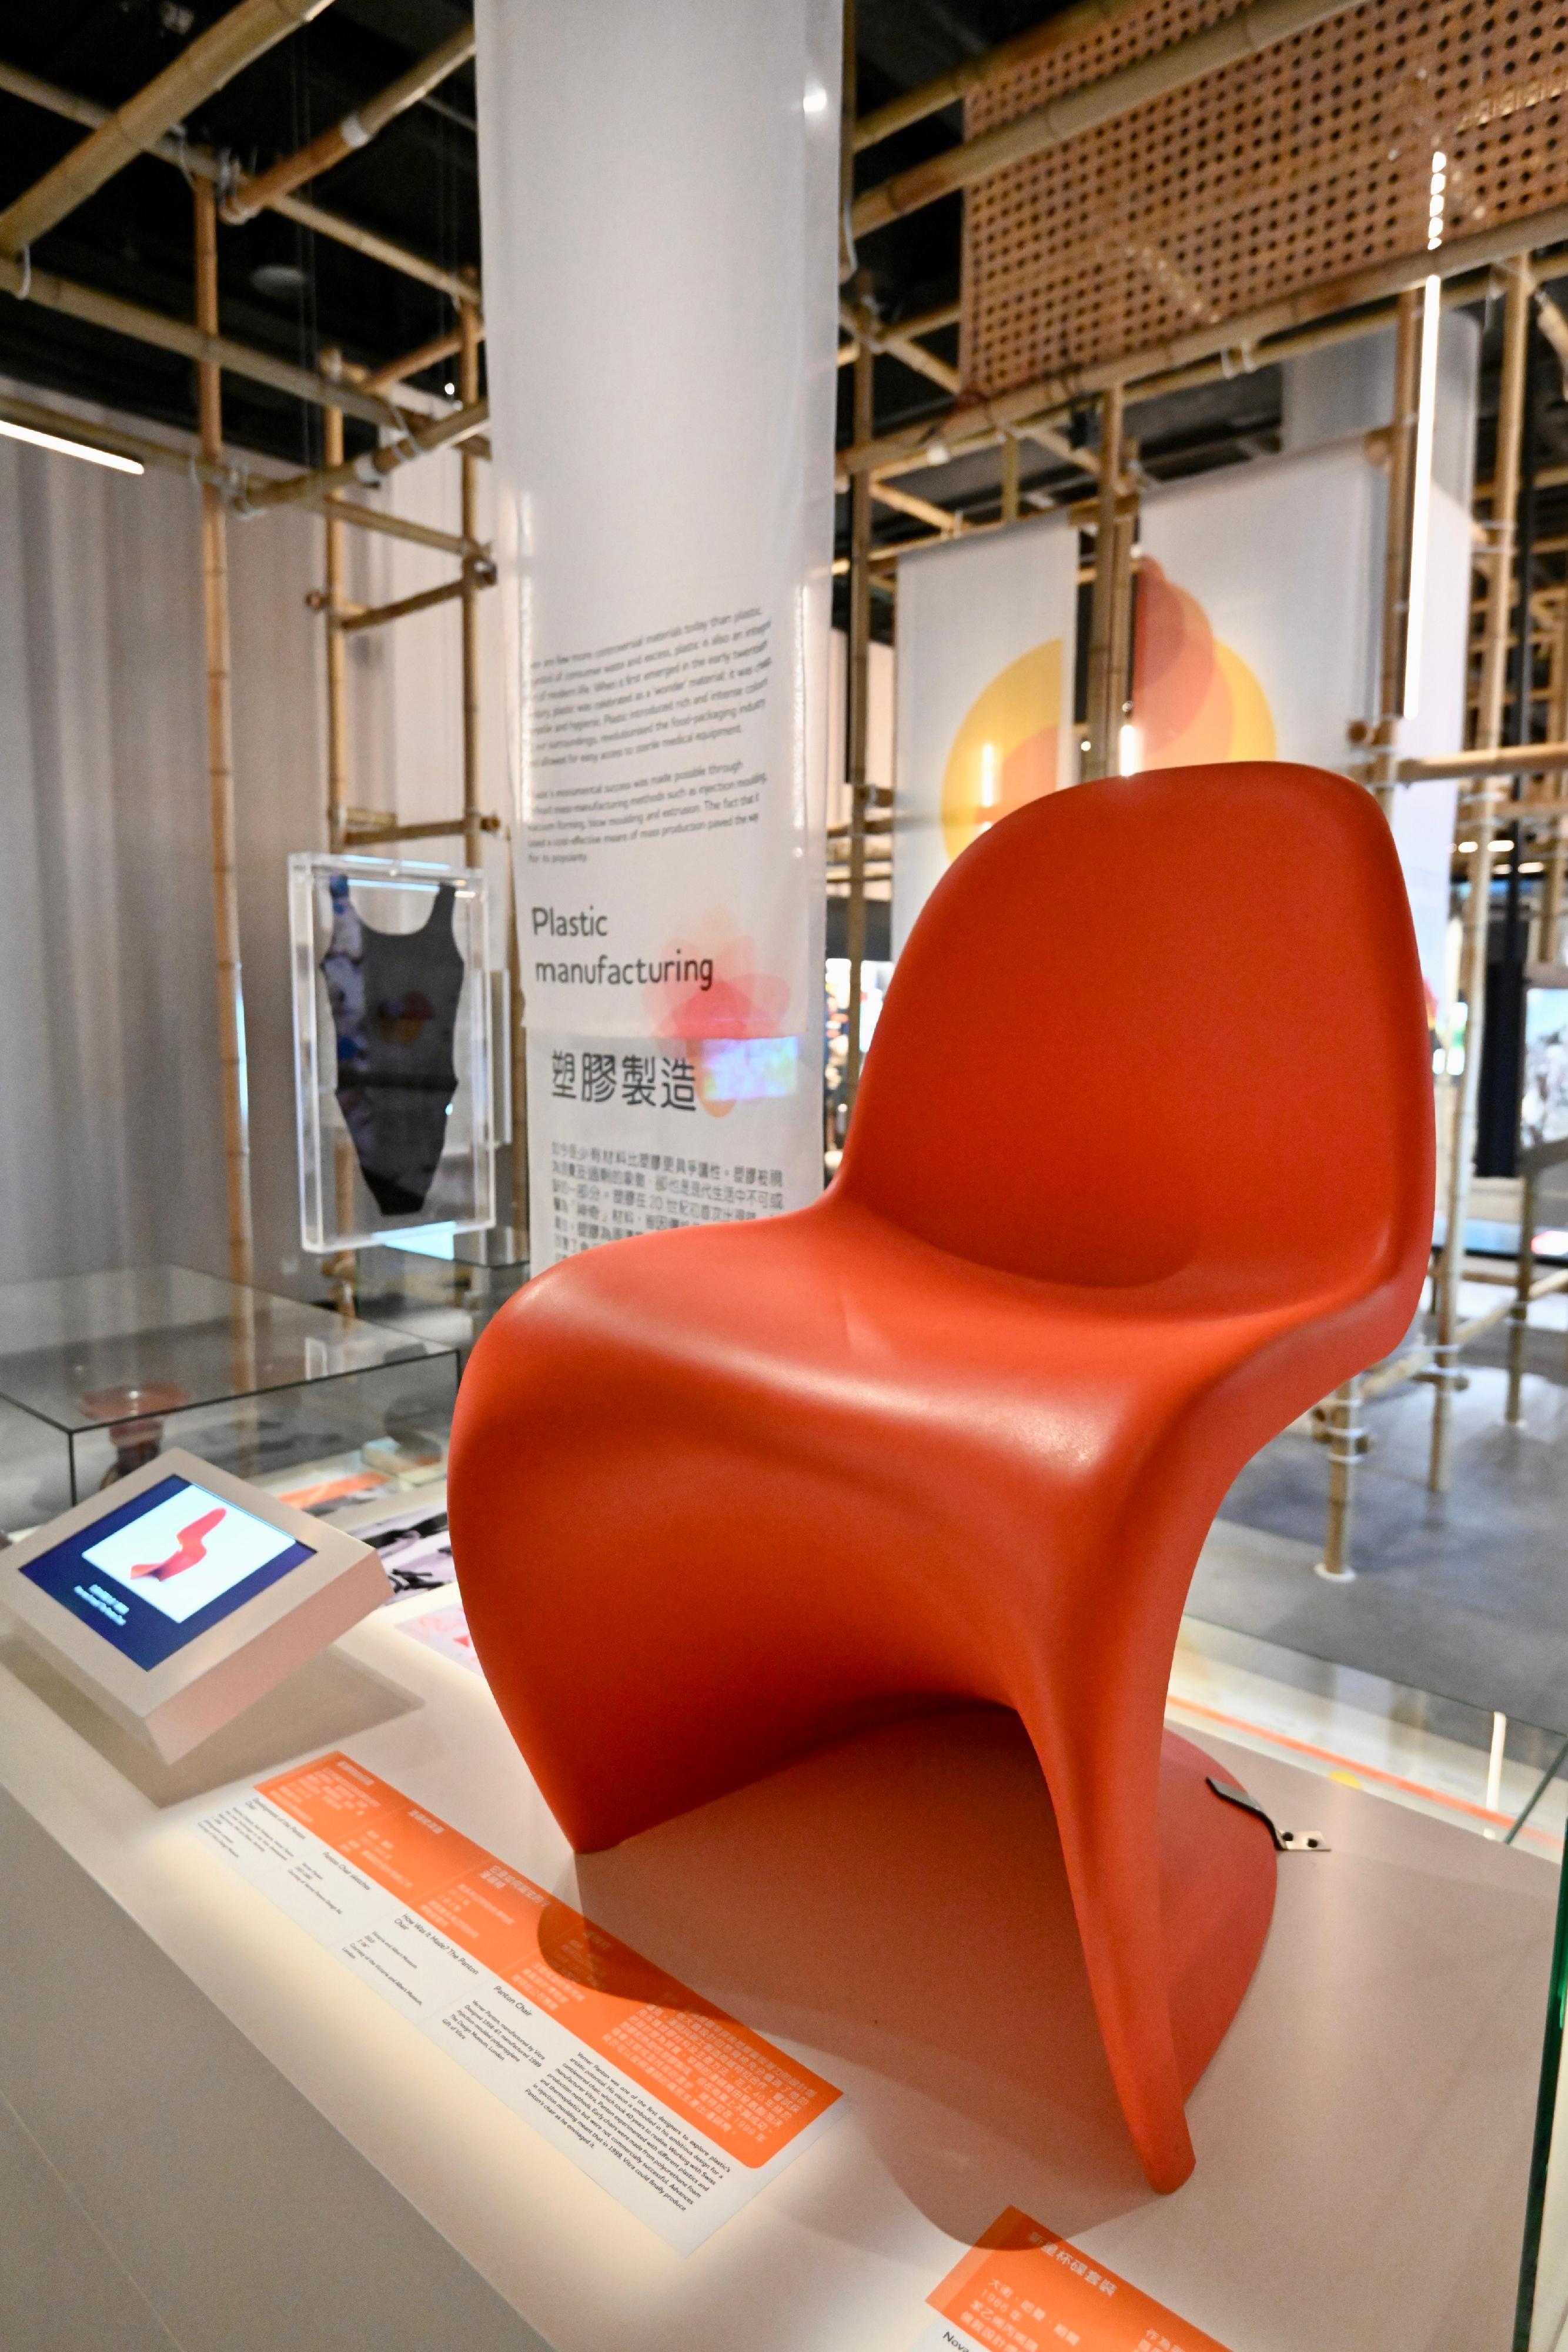 The Hong Kong Science Museum will present the "Material Tales - The Life of Things" exhibition starting from tomorrow (May 19). Photo shows a panton chair made from injection-moulded polypropylene, which is designed by Verner Panton.